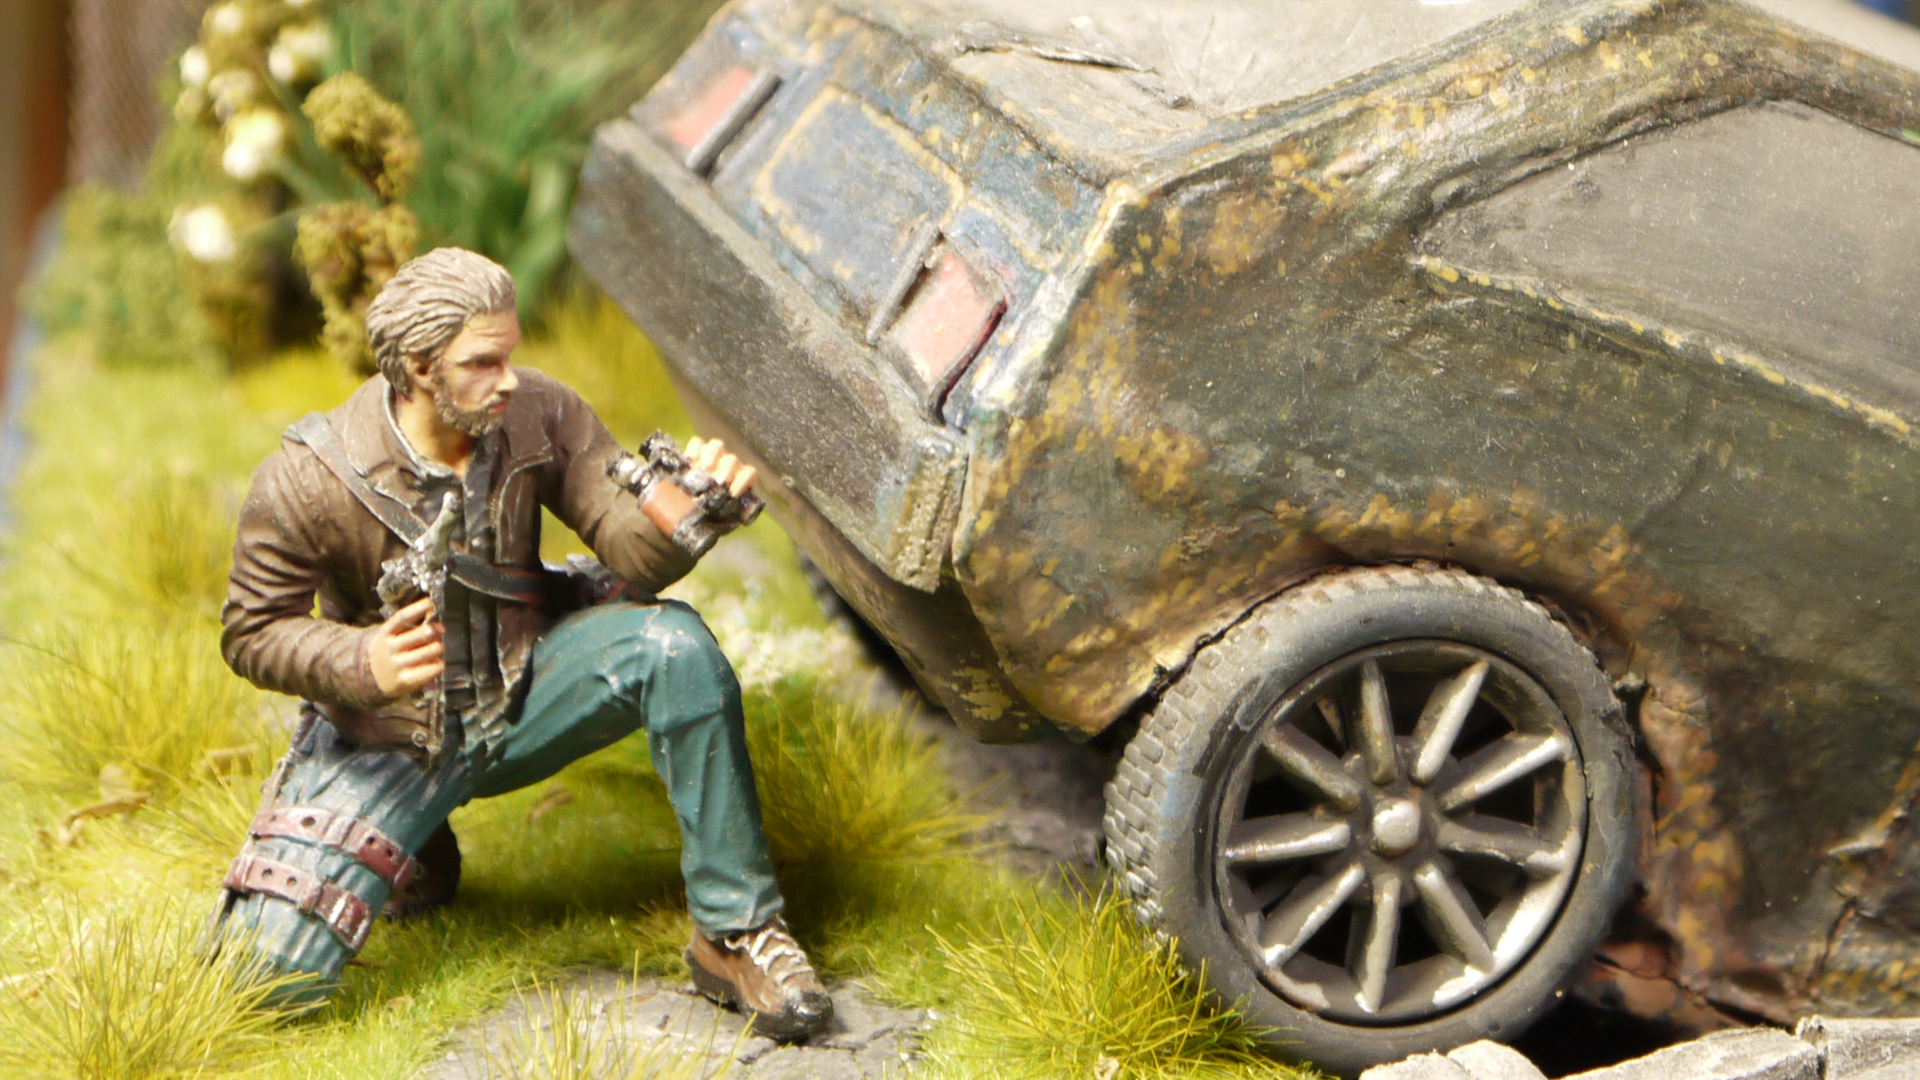 Diorama - "The Last of Us" Part-1